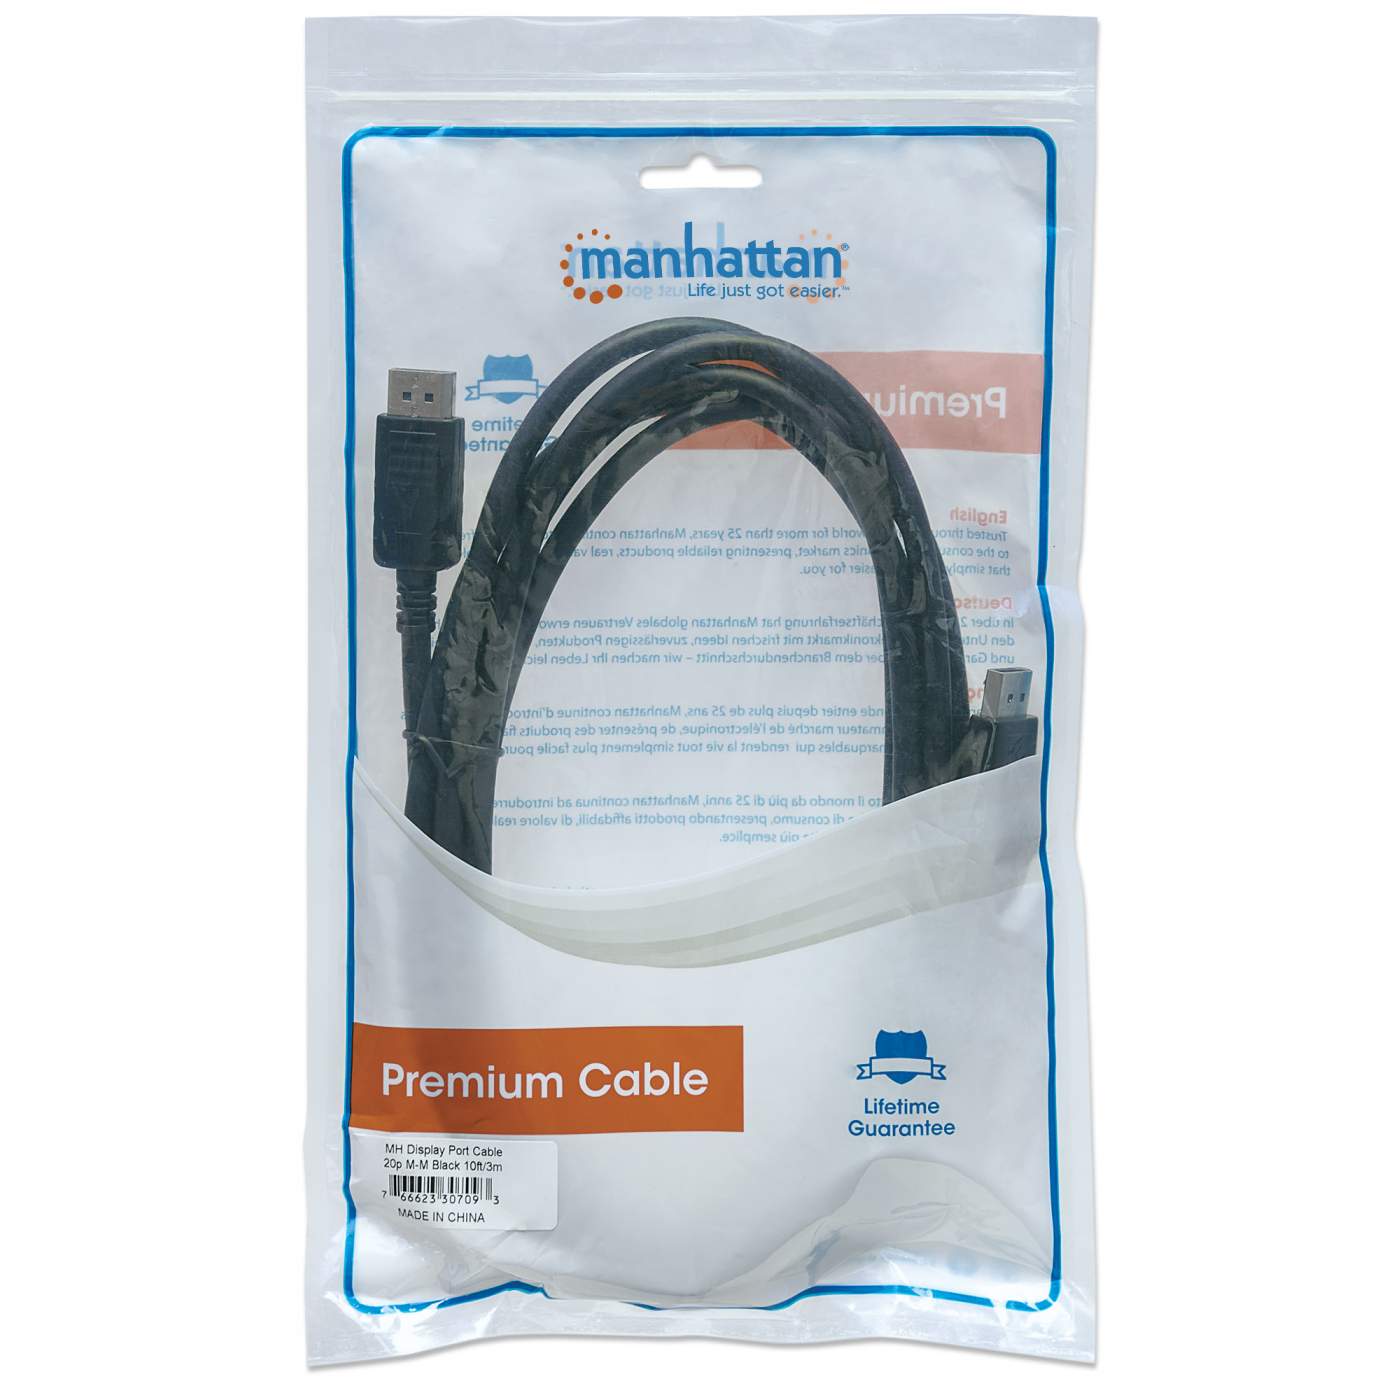 4K@60Hz DisplayPort Monitor Cable Packaging Image 2